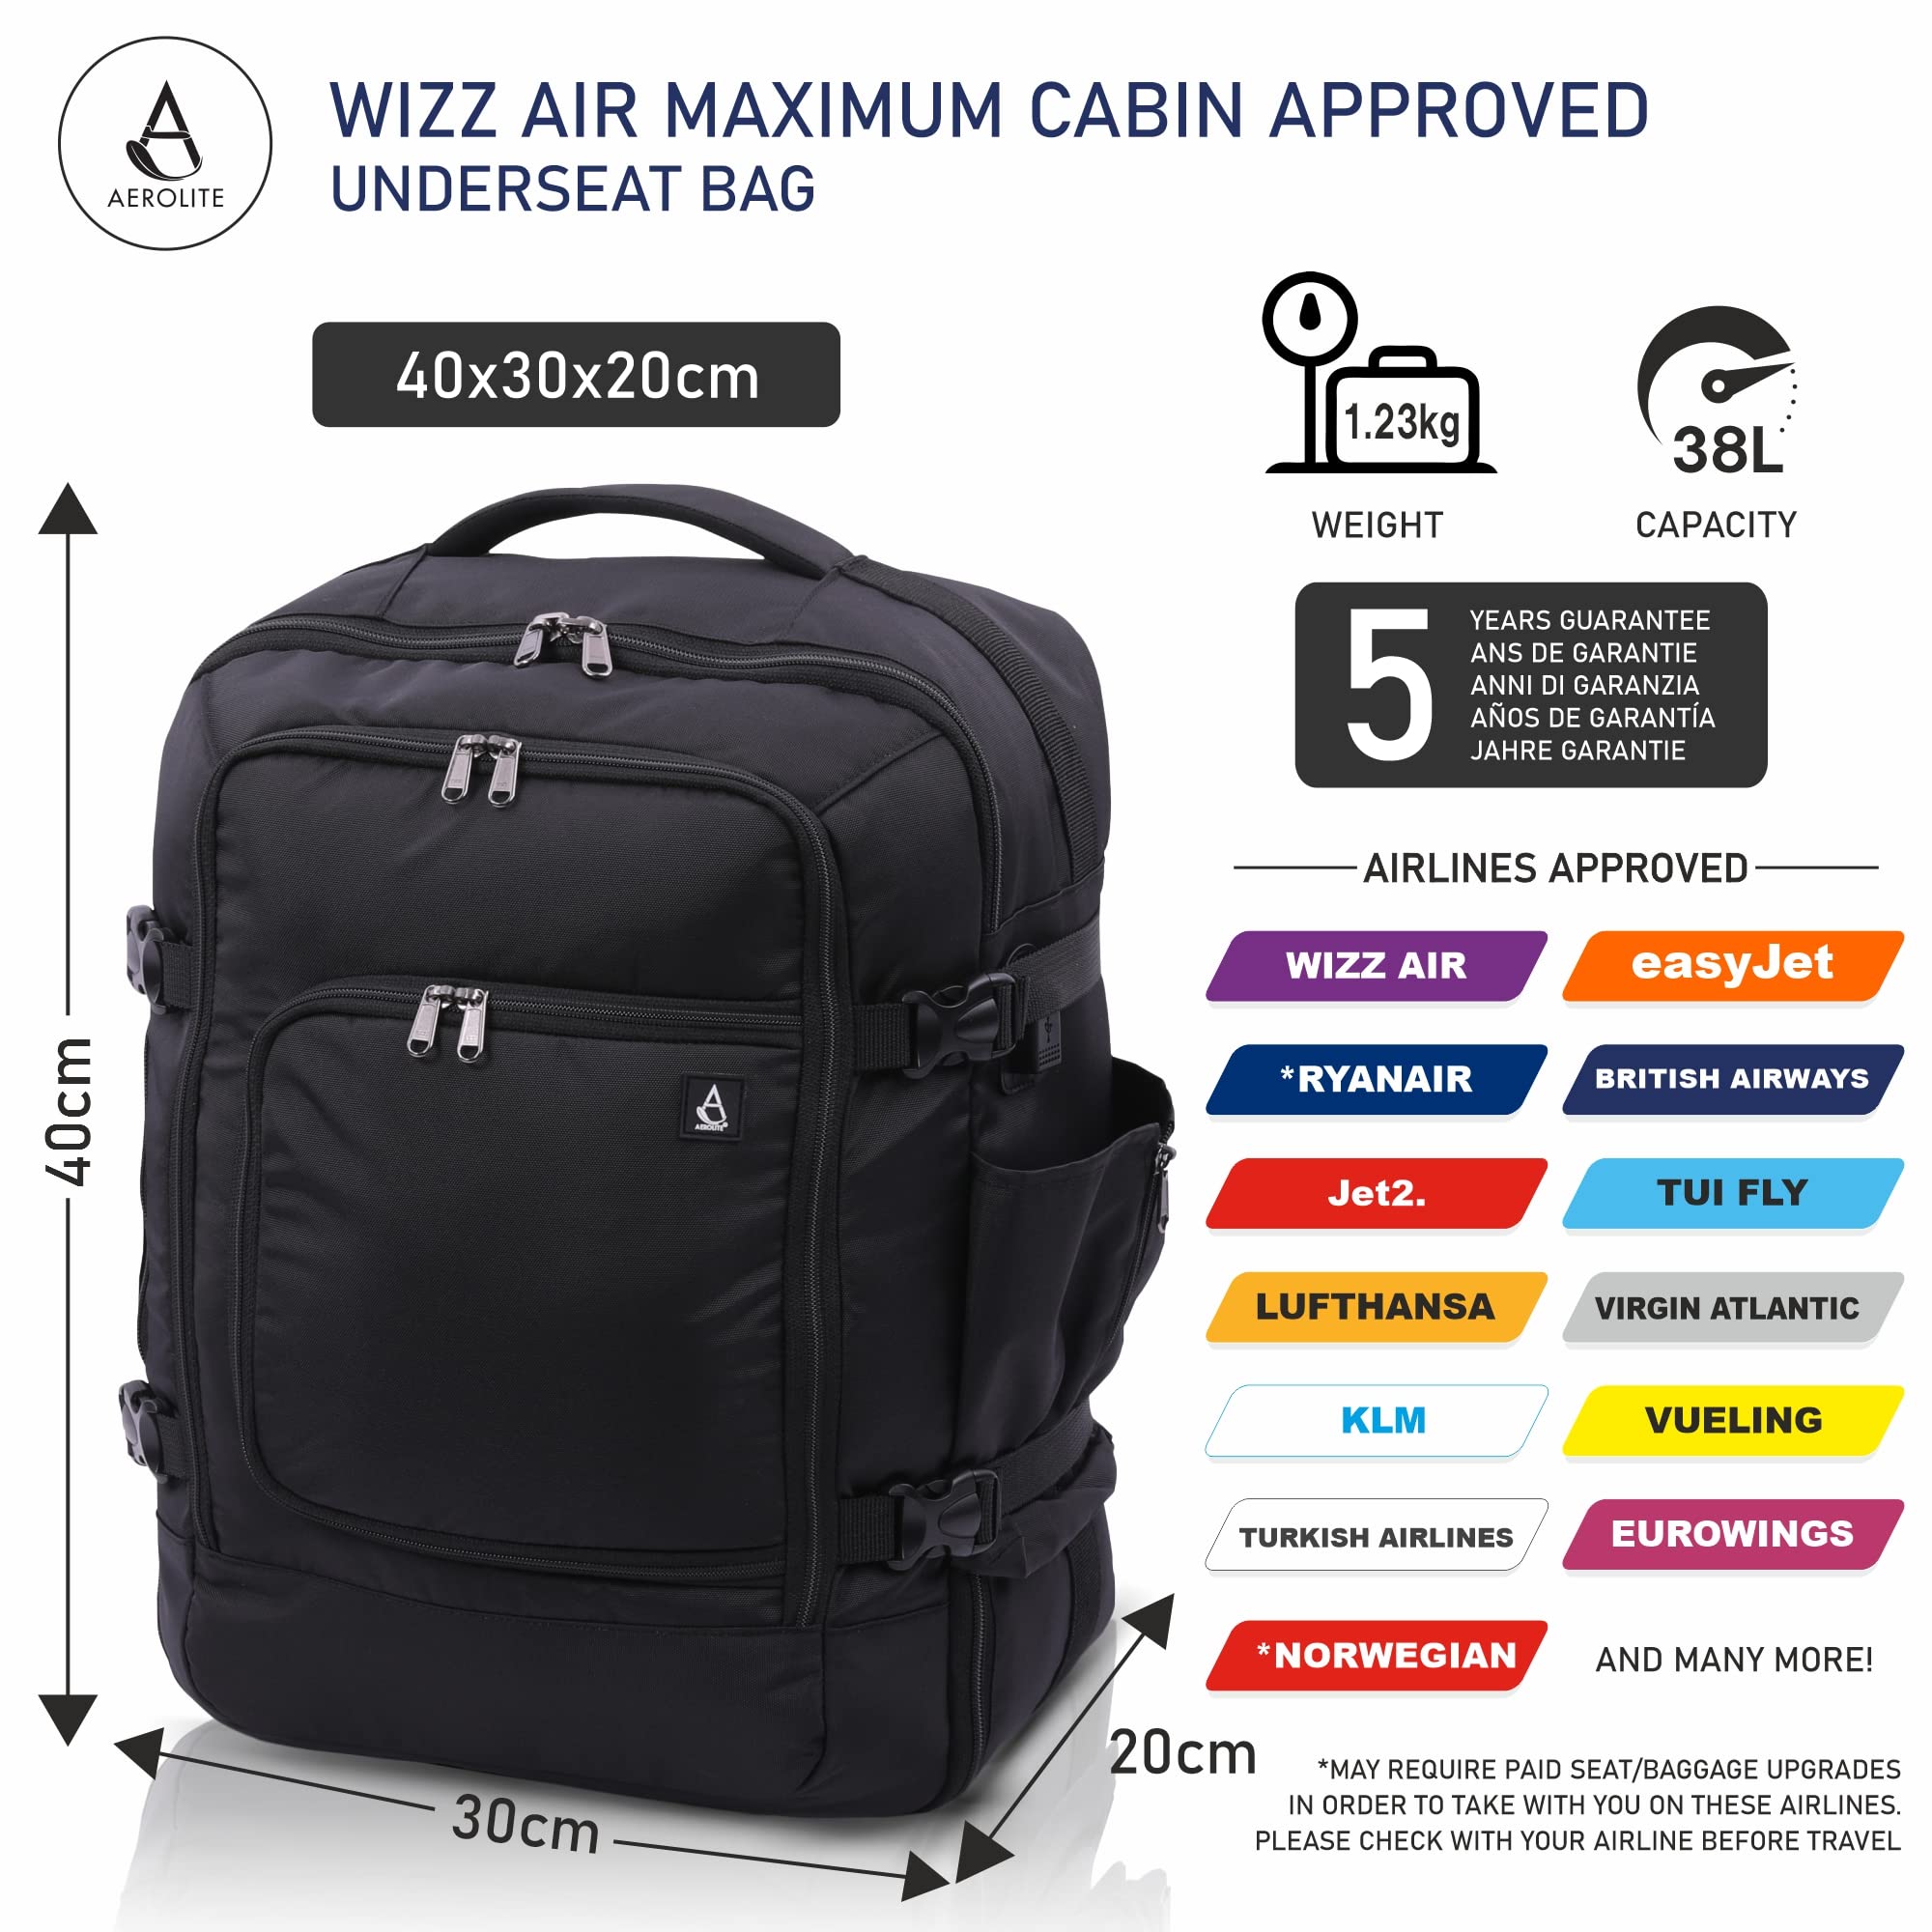 Aerolite 40x30x20 Wizz Air Maximum Size Backpack Eco-Friendly Cabin Luggage Approved Travel Carry On Holdall Lightweight Shoulder Bag Flight Rucksack with YKK Zippers 5 Year Warranty